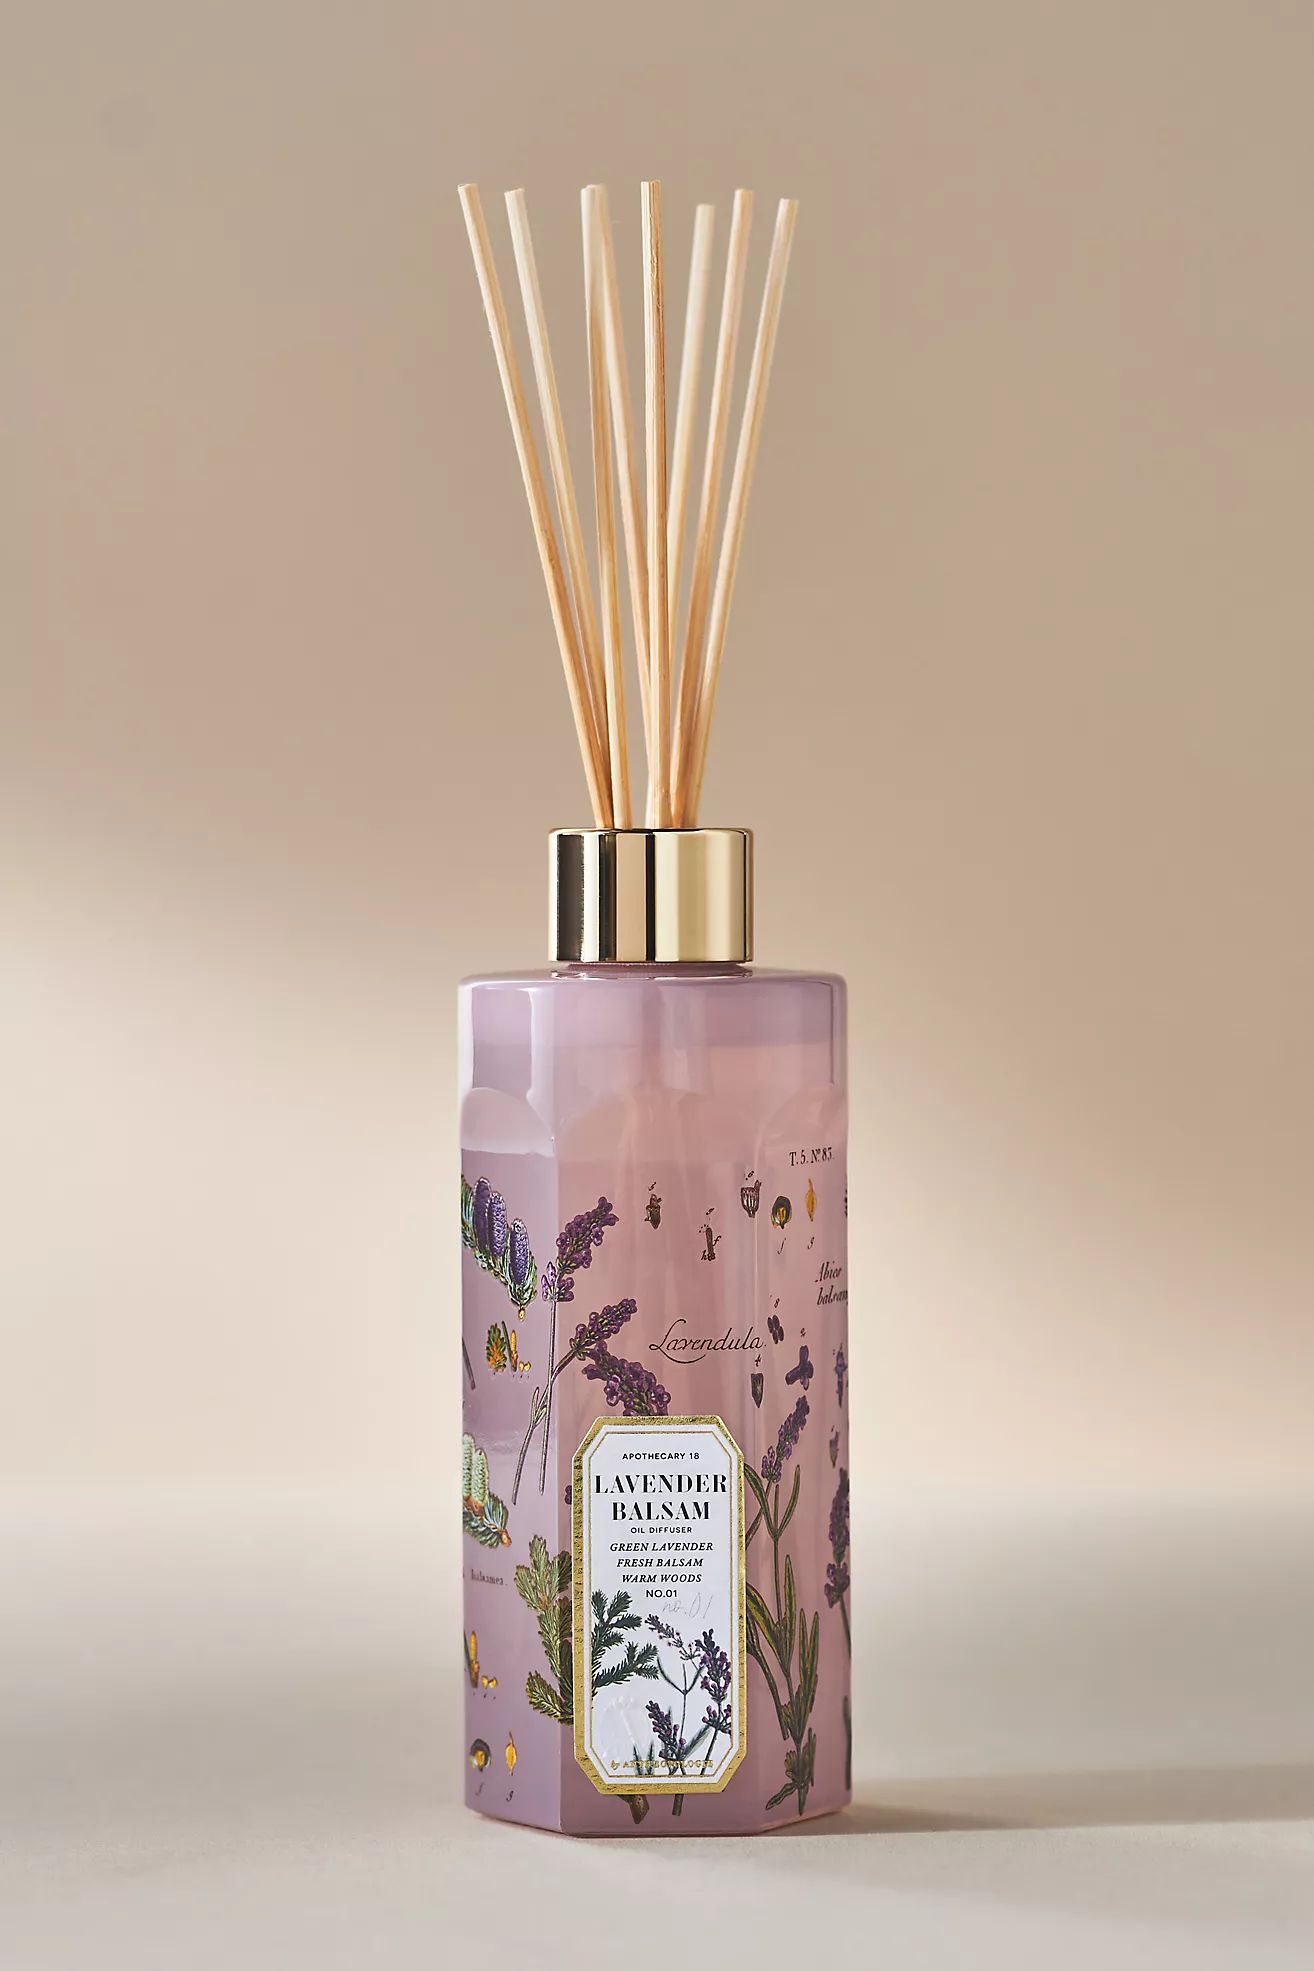 Apothecary 18 Fresh Lavender Balsam Reed Diffuser | Anthropologie (US)